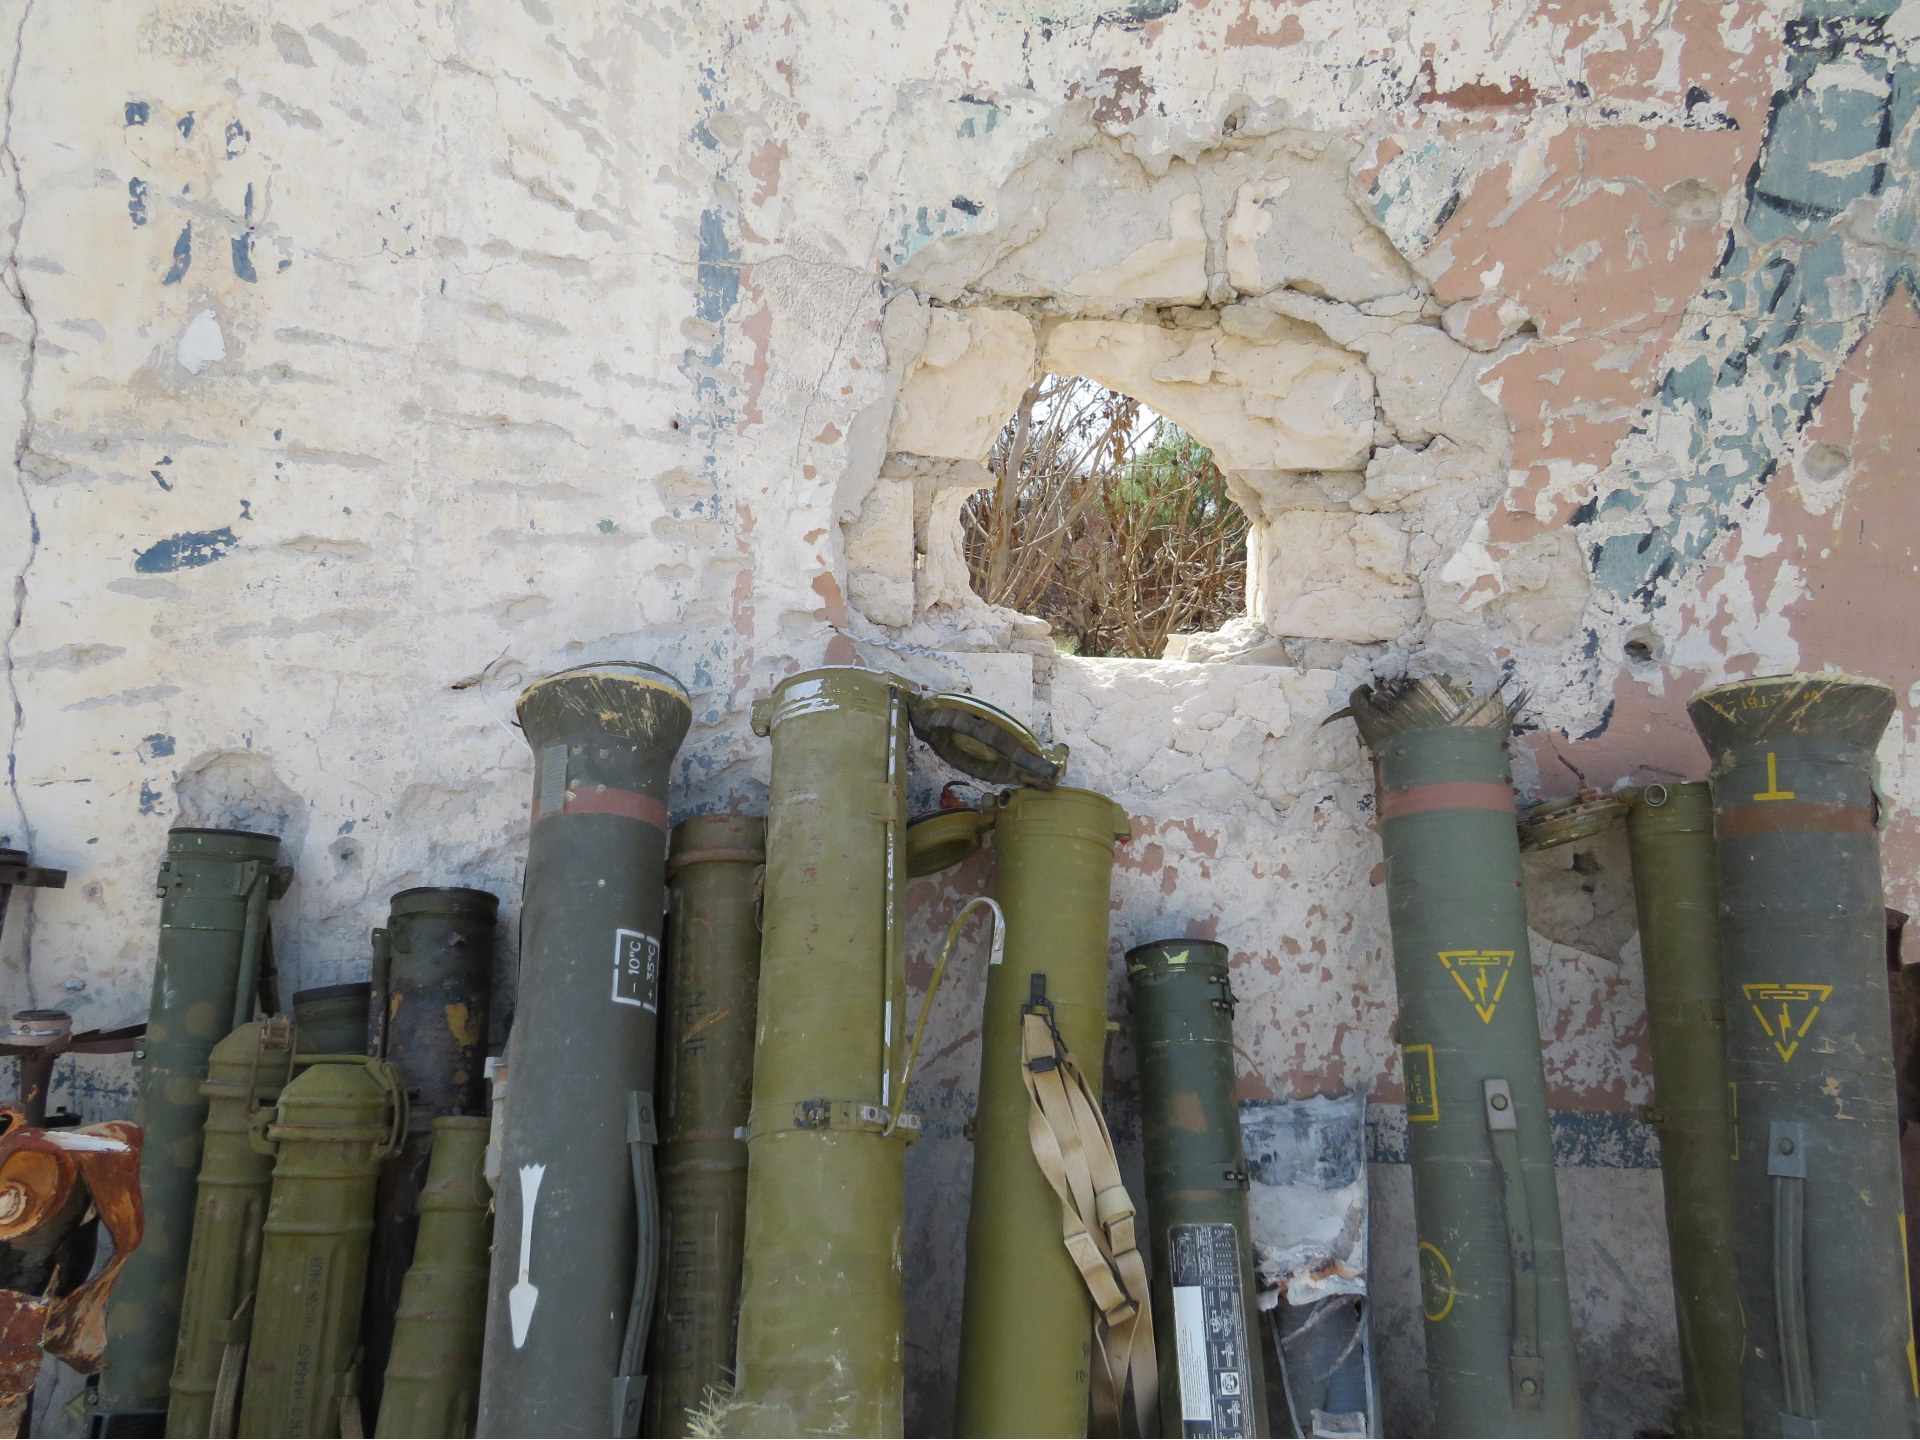 Rocket launchers recovered from residential battlefields and brought to a military base in Tripoli (MEE/Daniel Hilton)